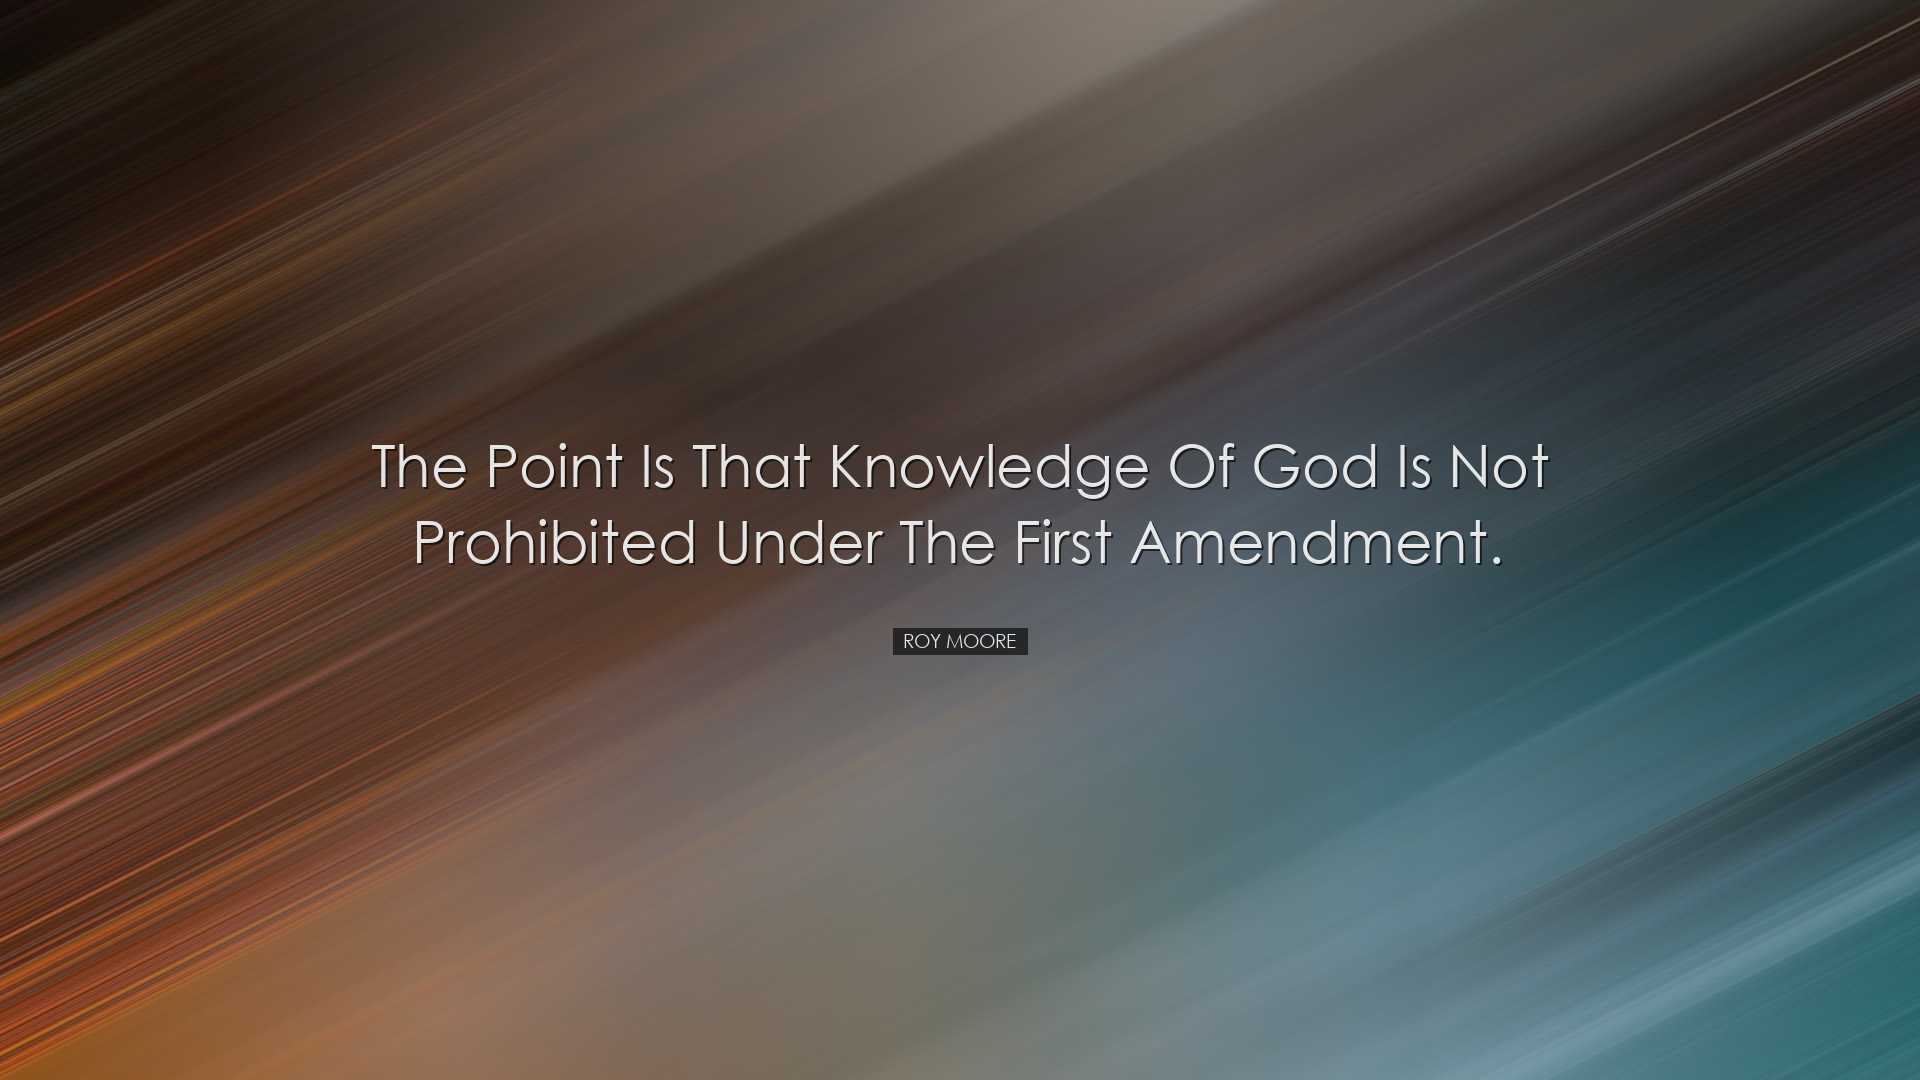 The point is that knowledge of God is not prohibited under the Fir